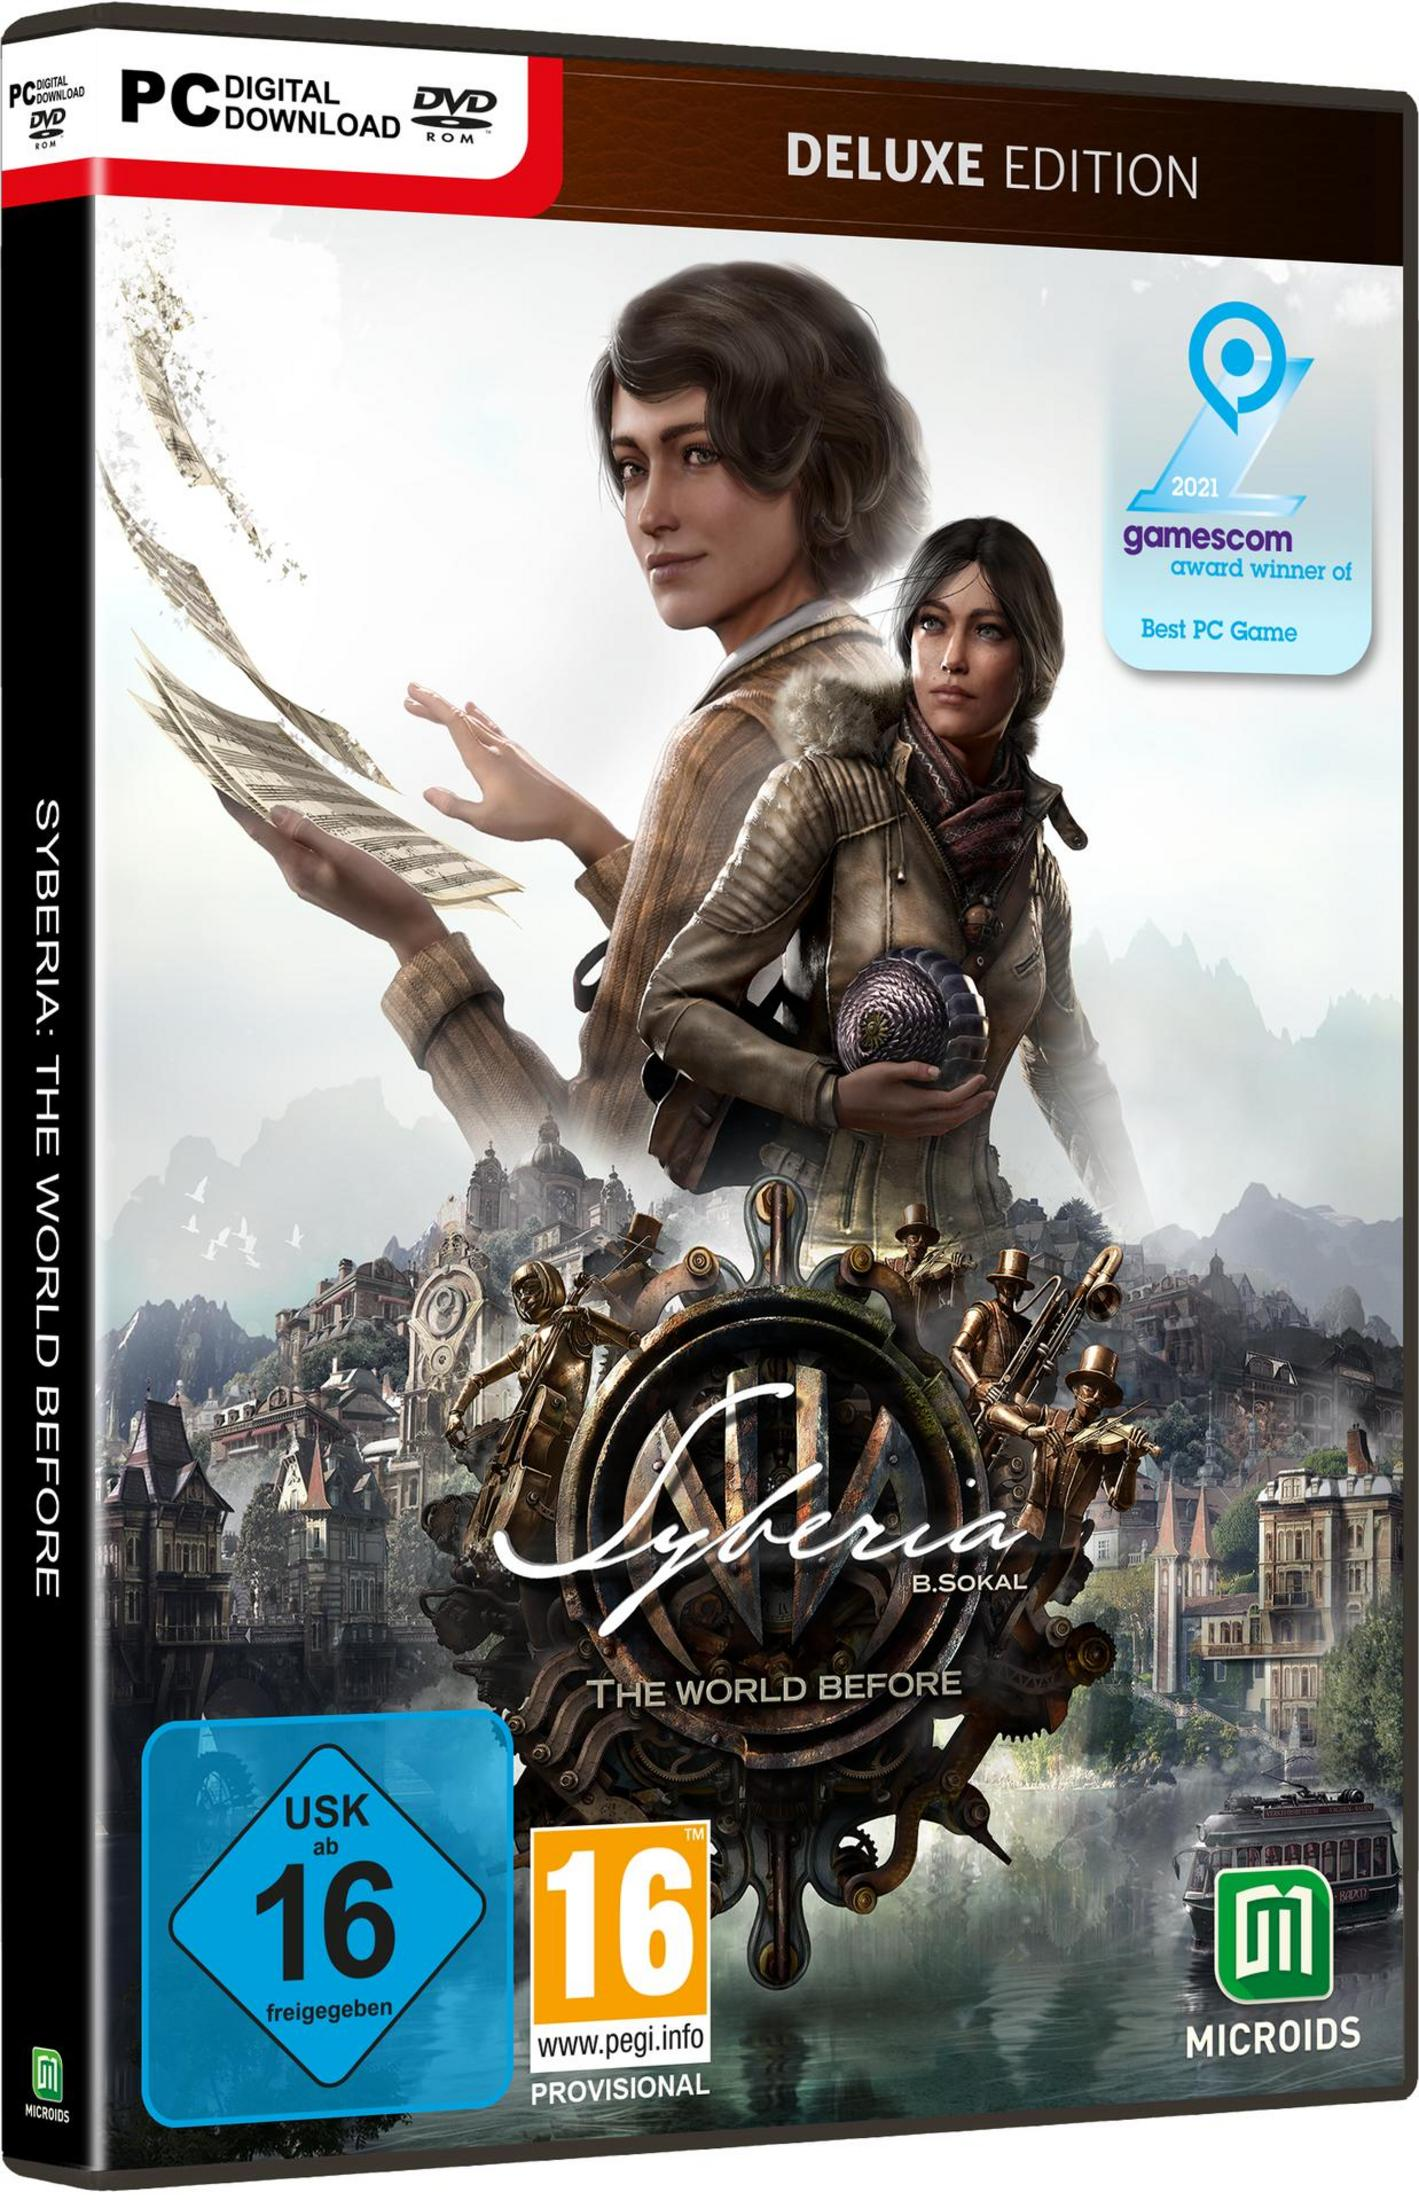 - Before DELUXE Syberia: The [PC] PC World